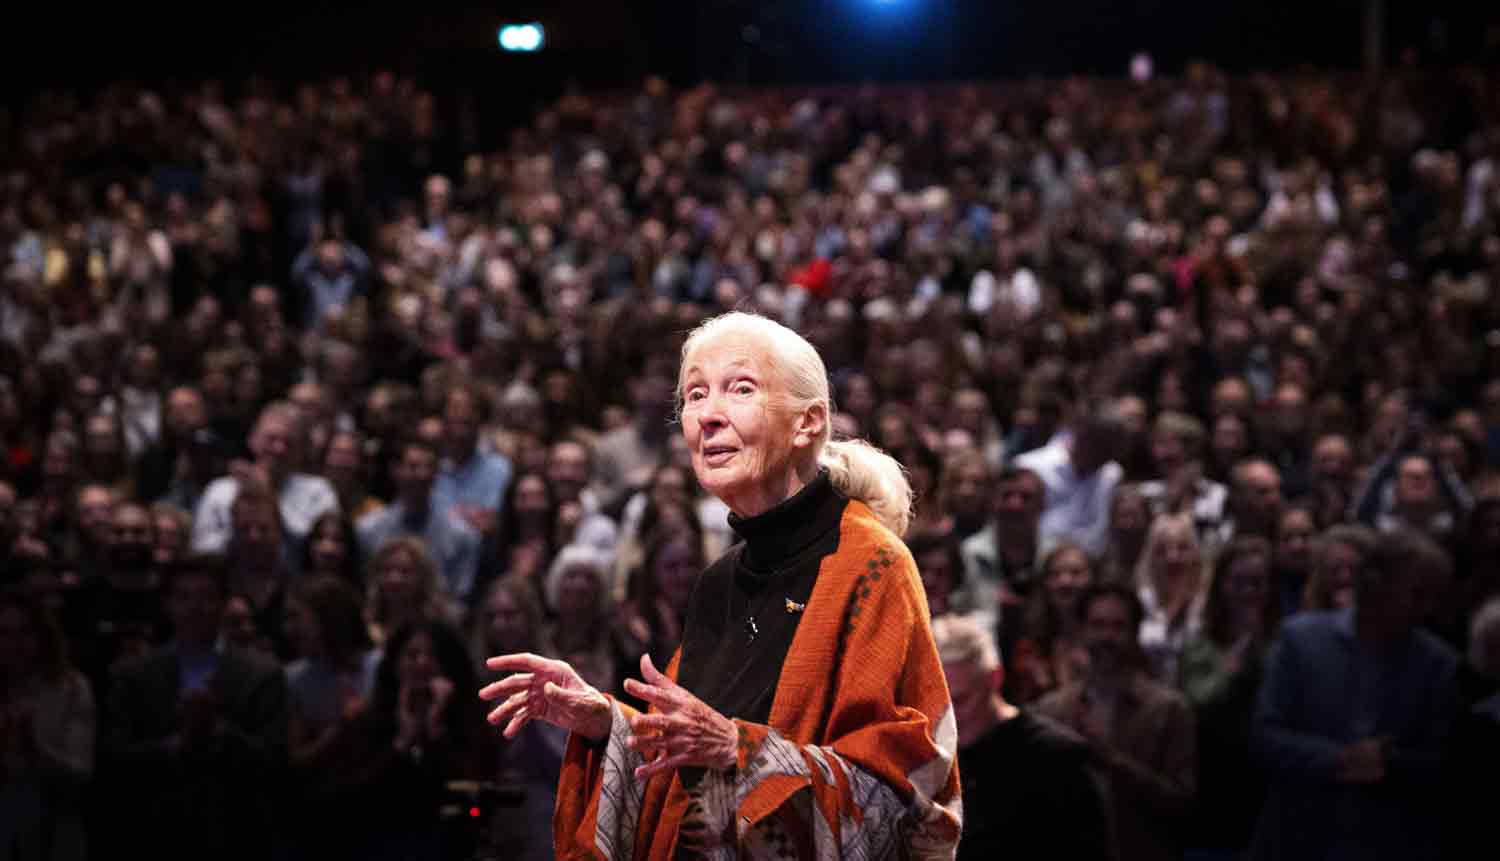 Jane Goodall speaks in front of a large audience.